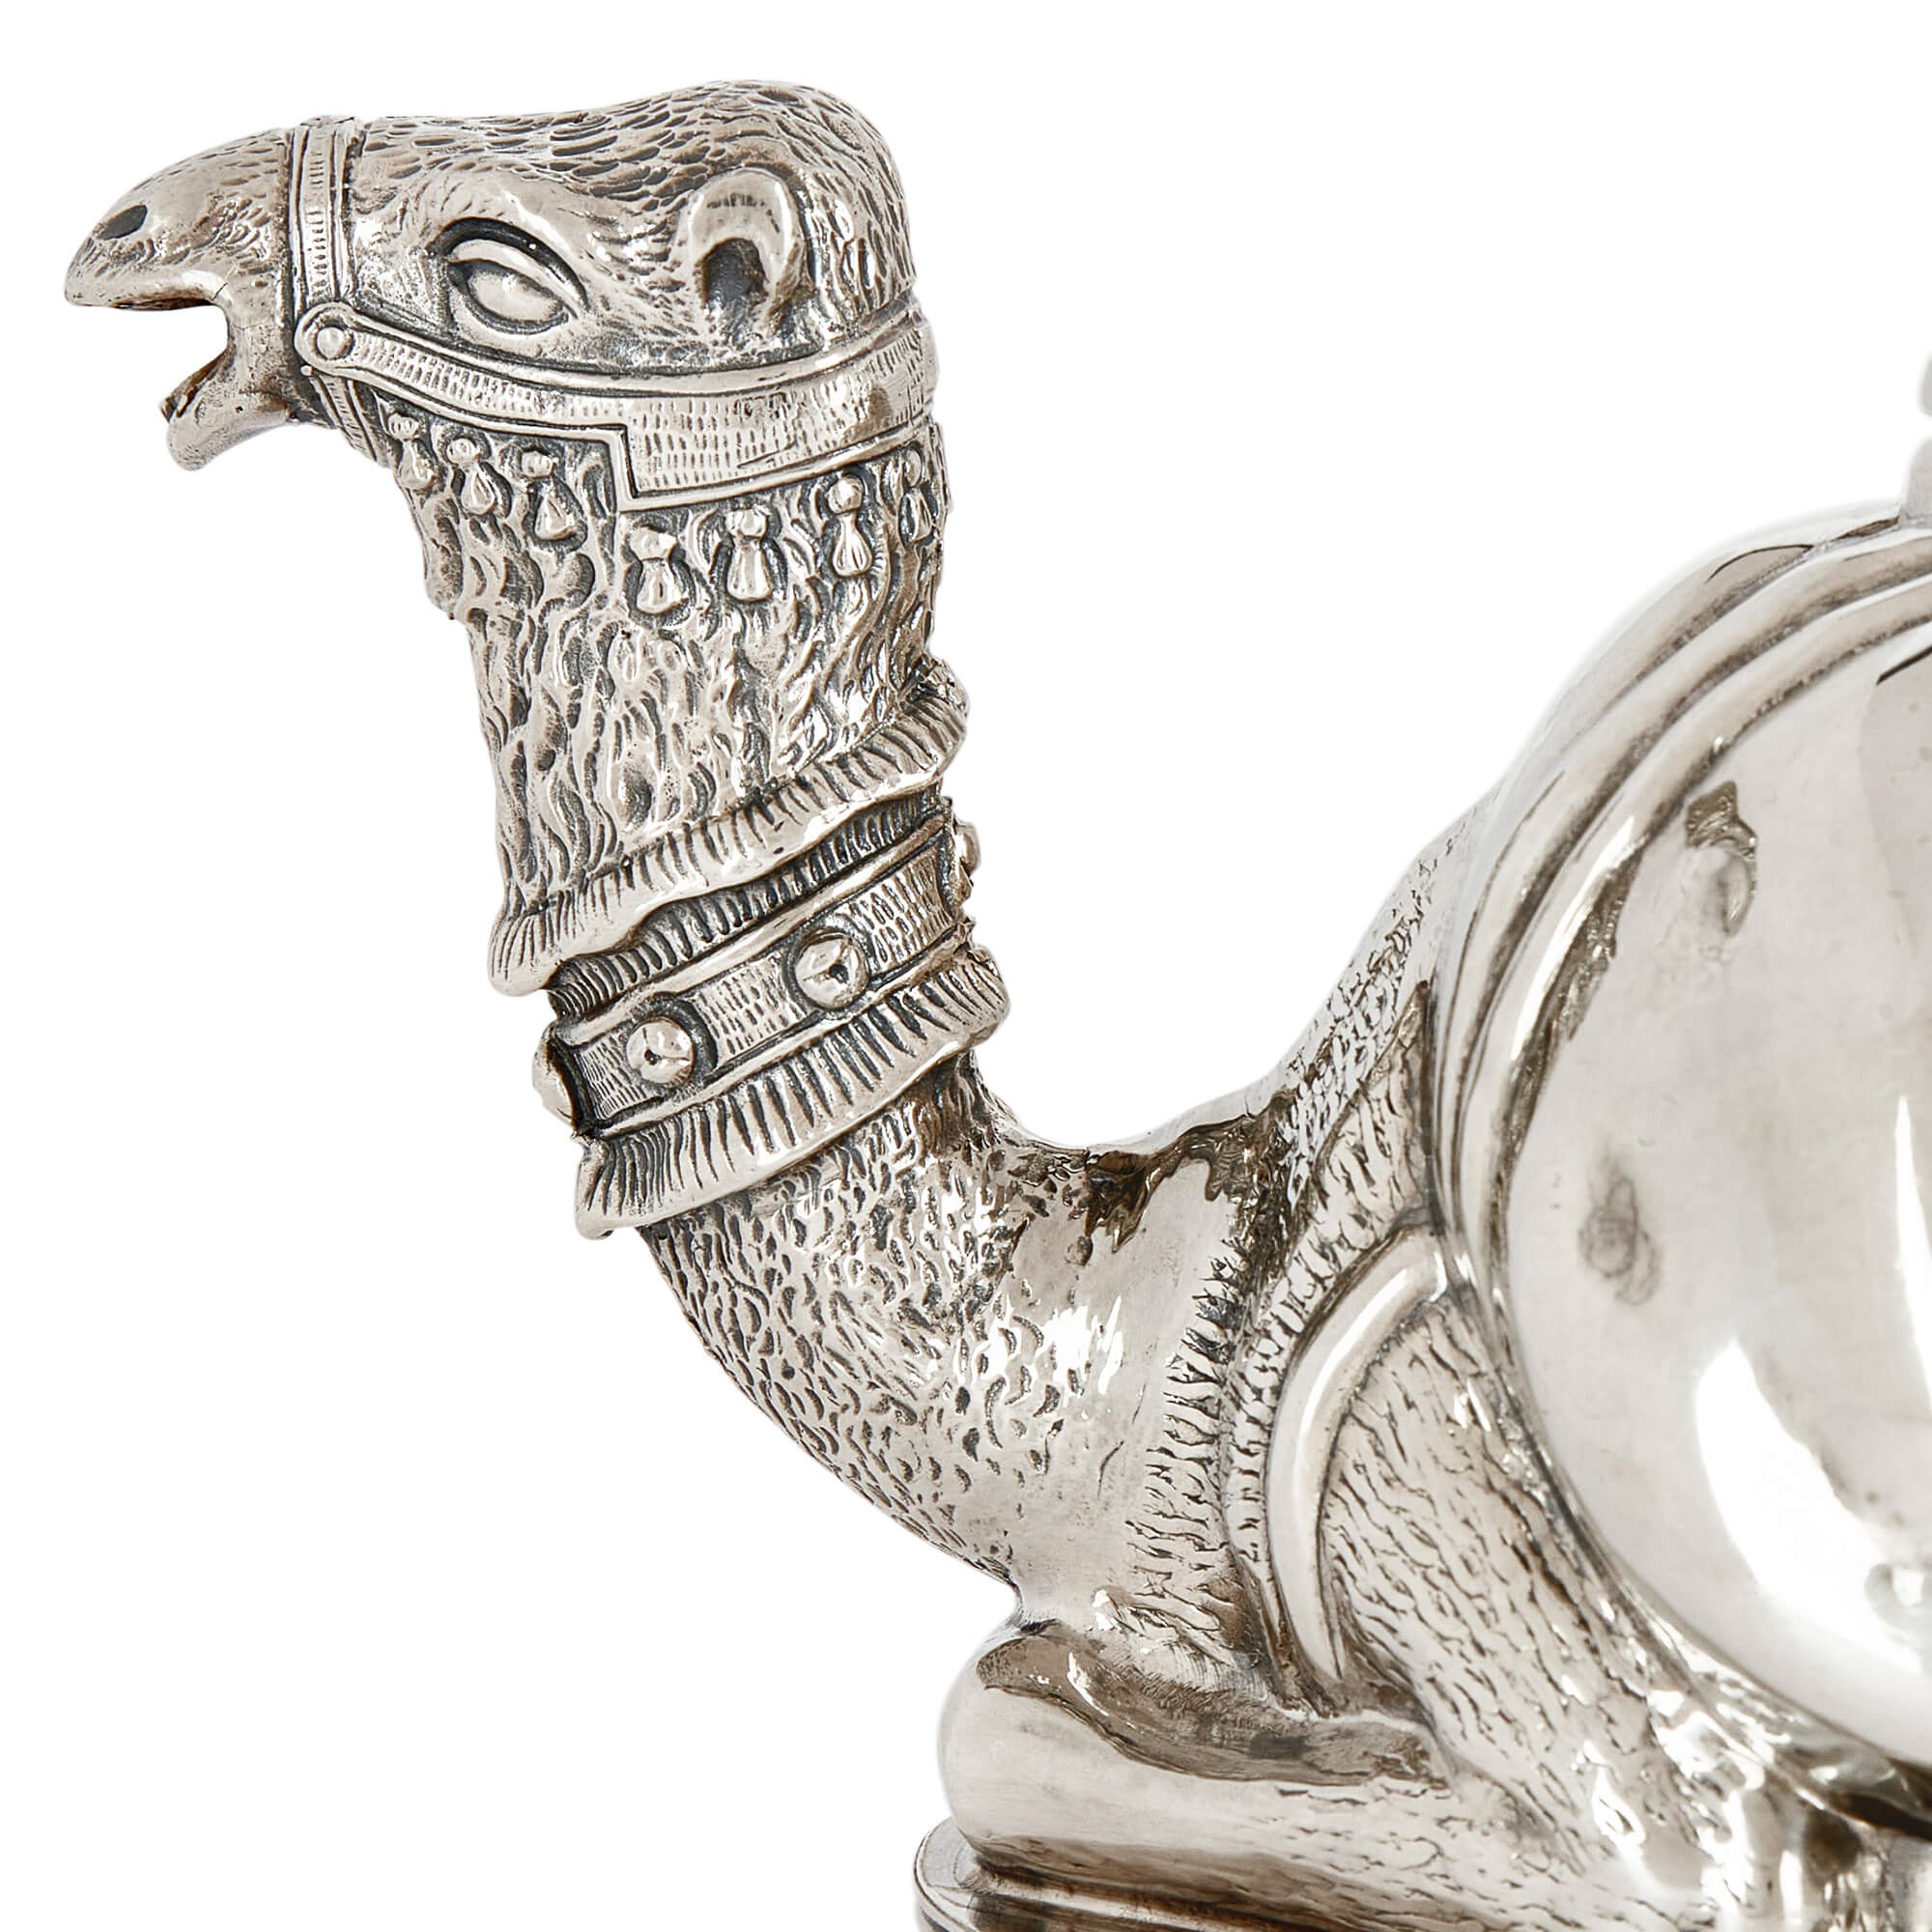 Camel Form Karawan Silver-Plated Teapot by Mariage Freres Paris France